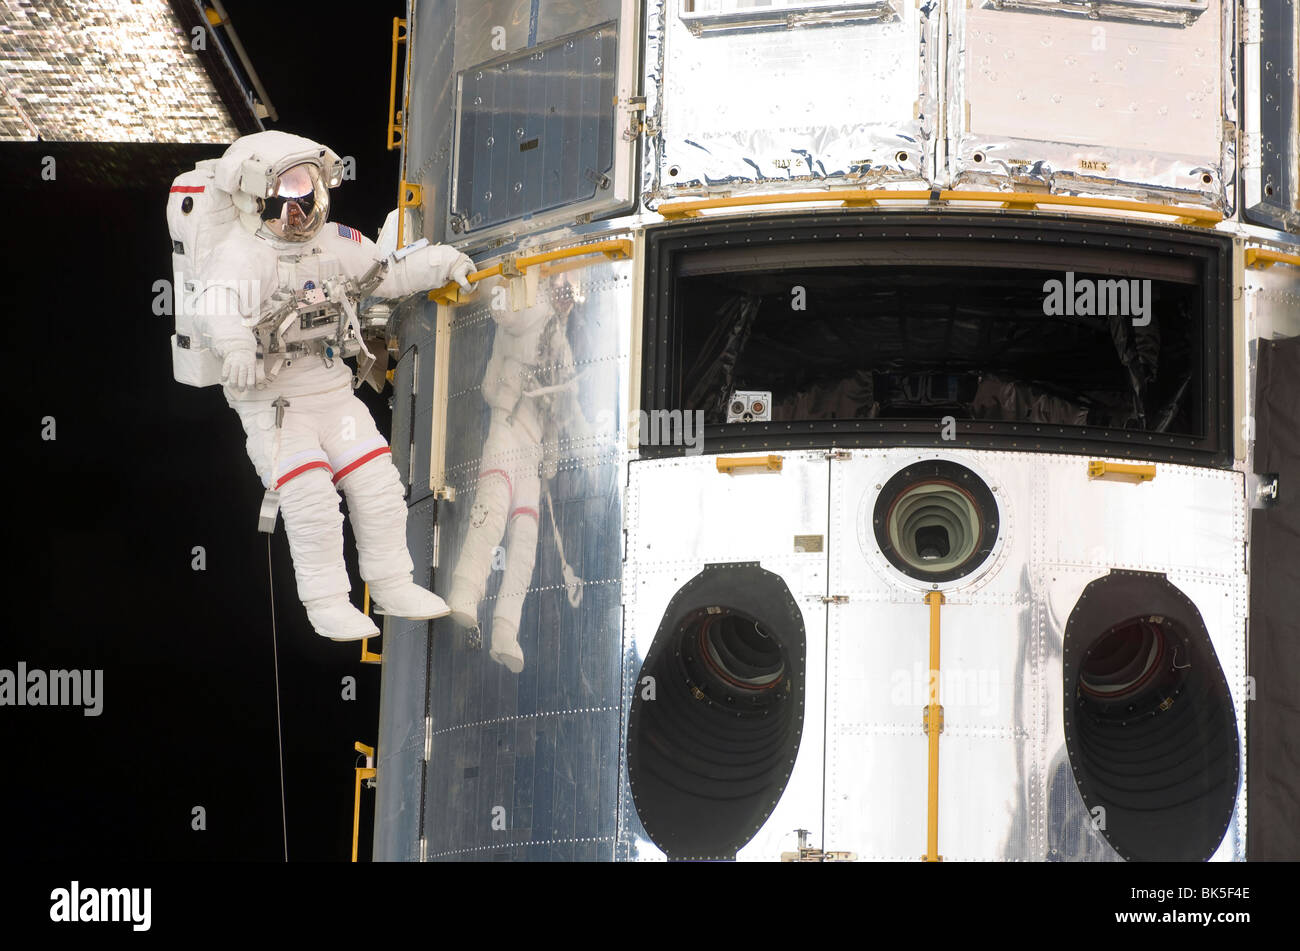 Astronaut performs work on the Hubble Space Telescope Stock Photo